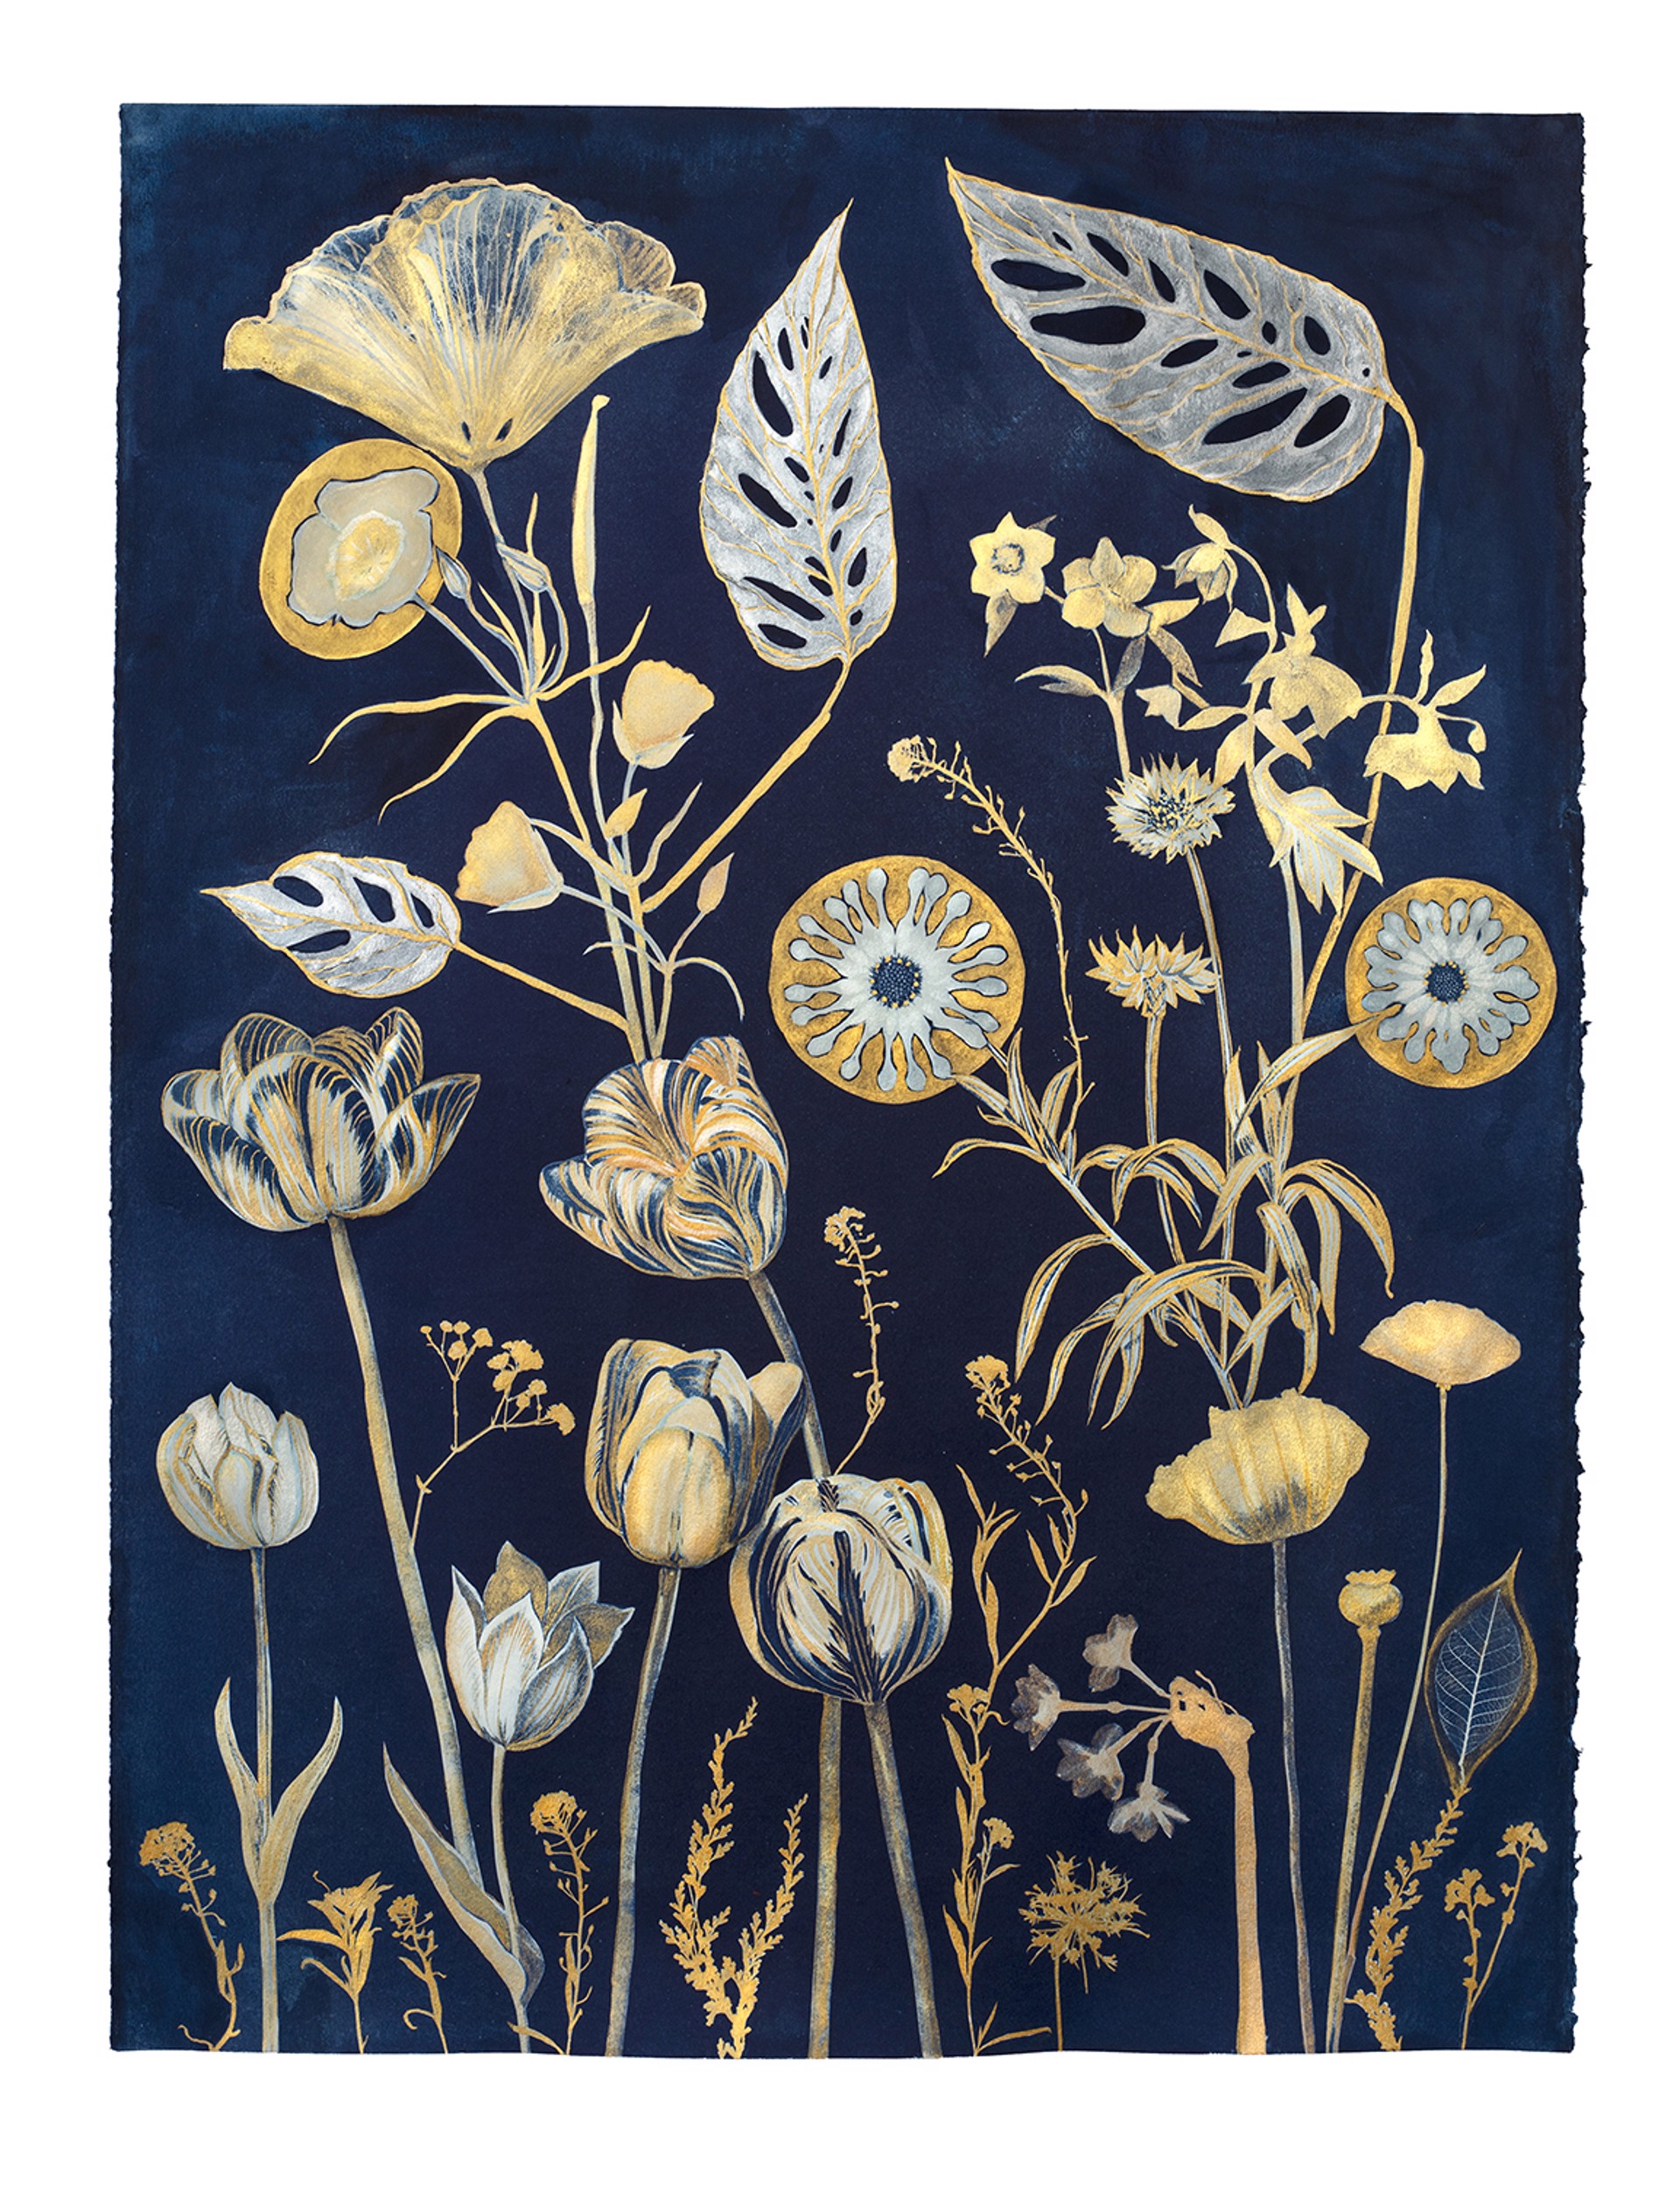 Cyanotype Painting (Gold Tulips, Leaves, etc.) by Julia Whitney Barnes